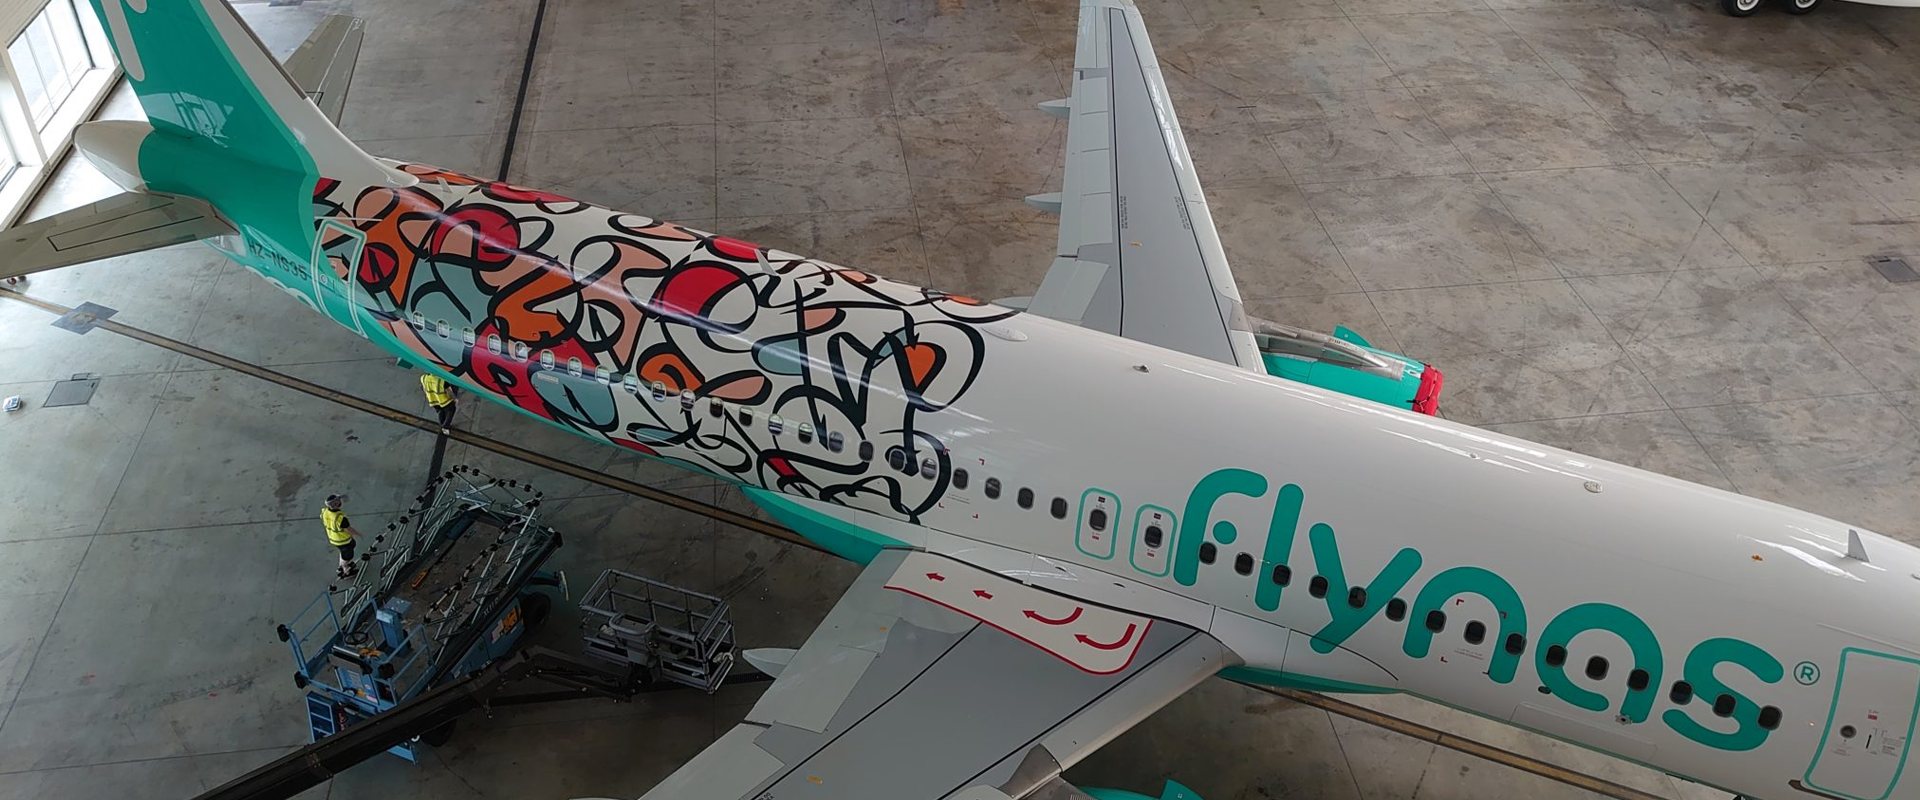 7 of the most unusual and impressive aircraft liveries, MTB Events. Image shows Flynas aircraft with colourful pattern made from the 'Year of Arabic Calligraphy' logo.